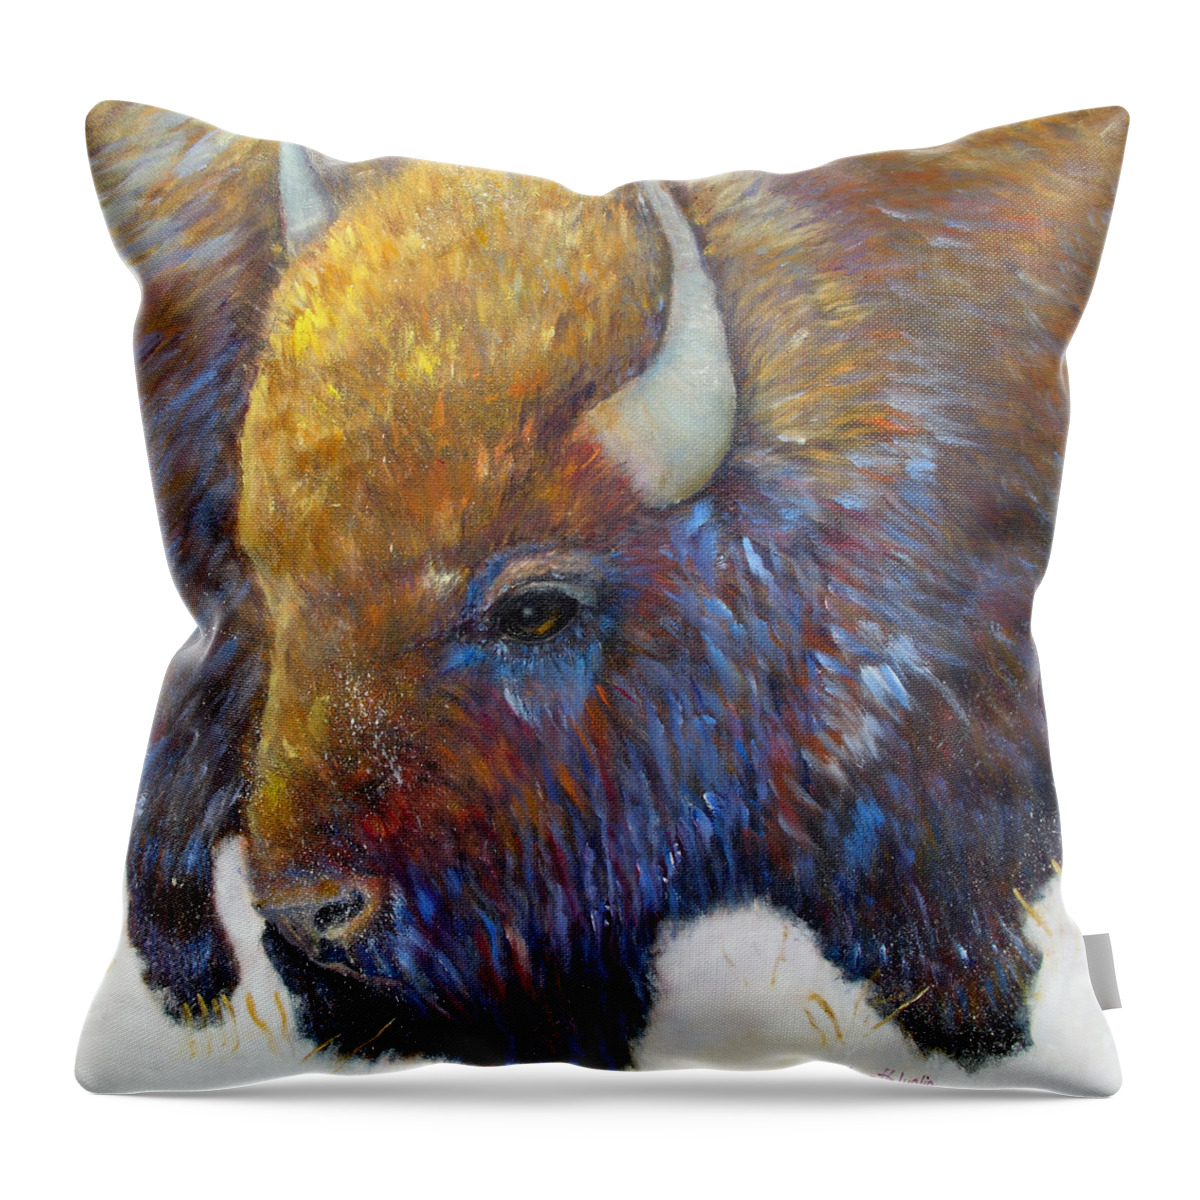 Bison Throw Pillow featuring the painting Bison by Loretta Luglio